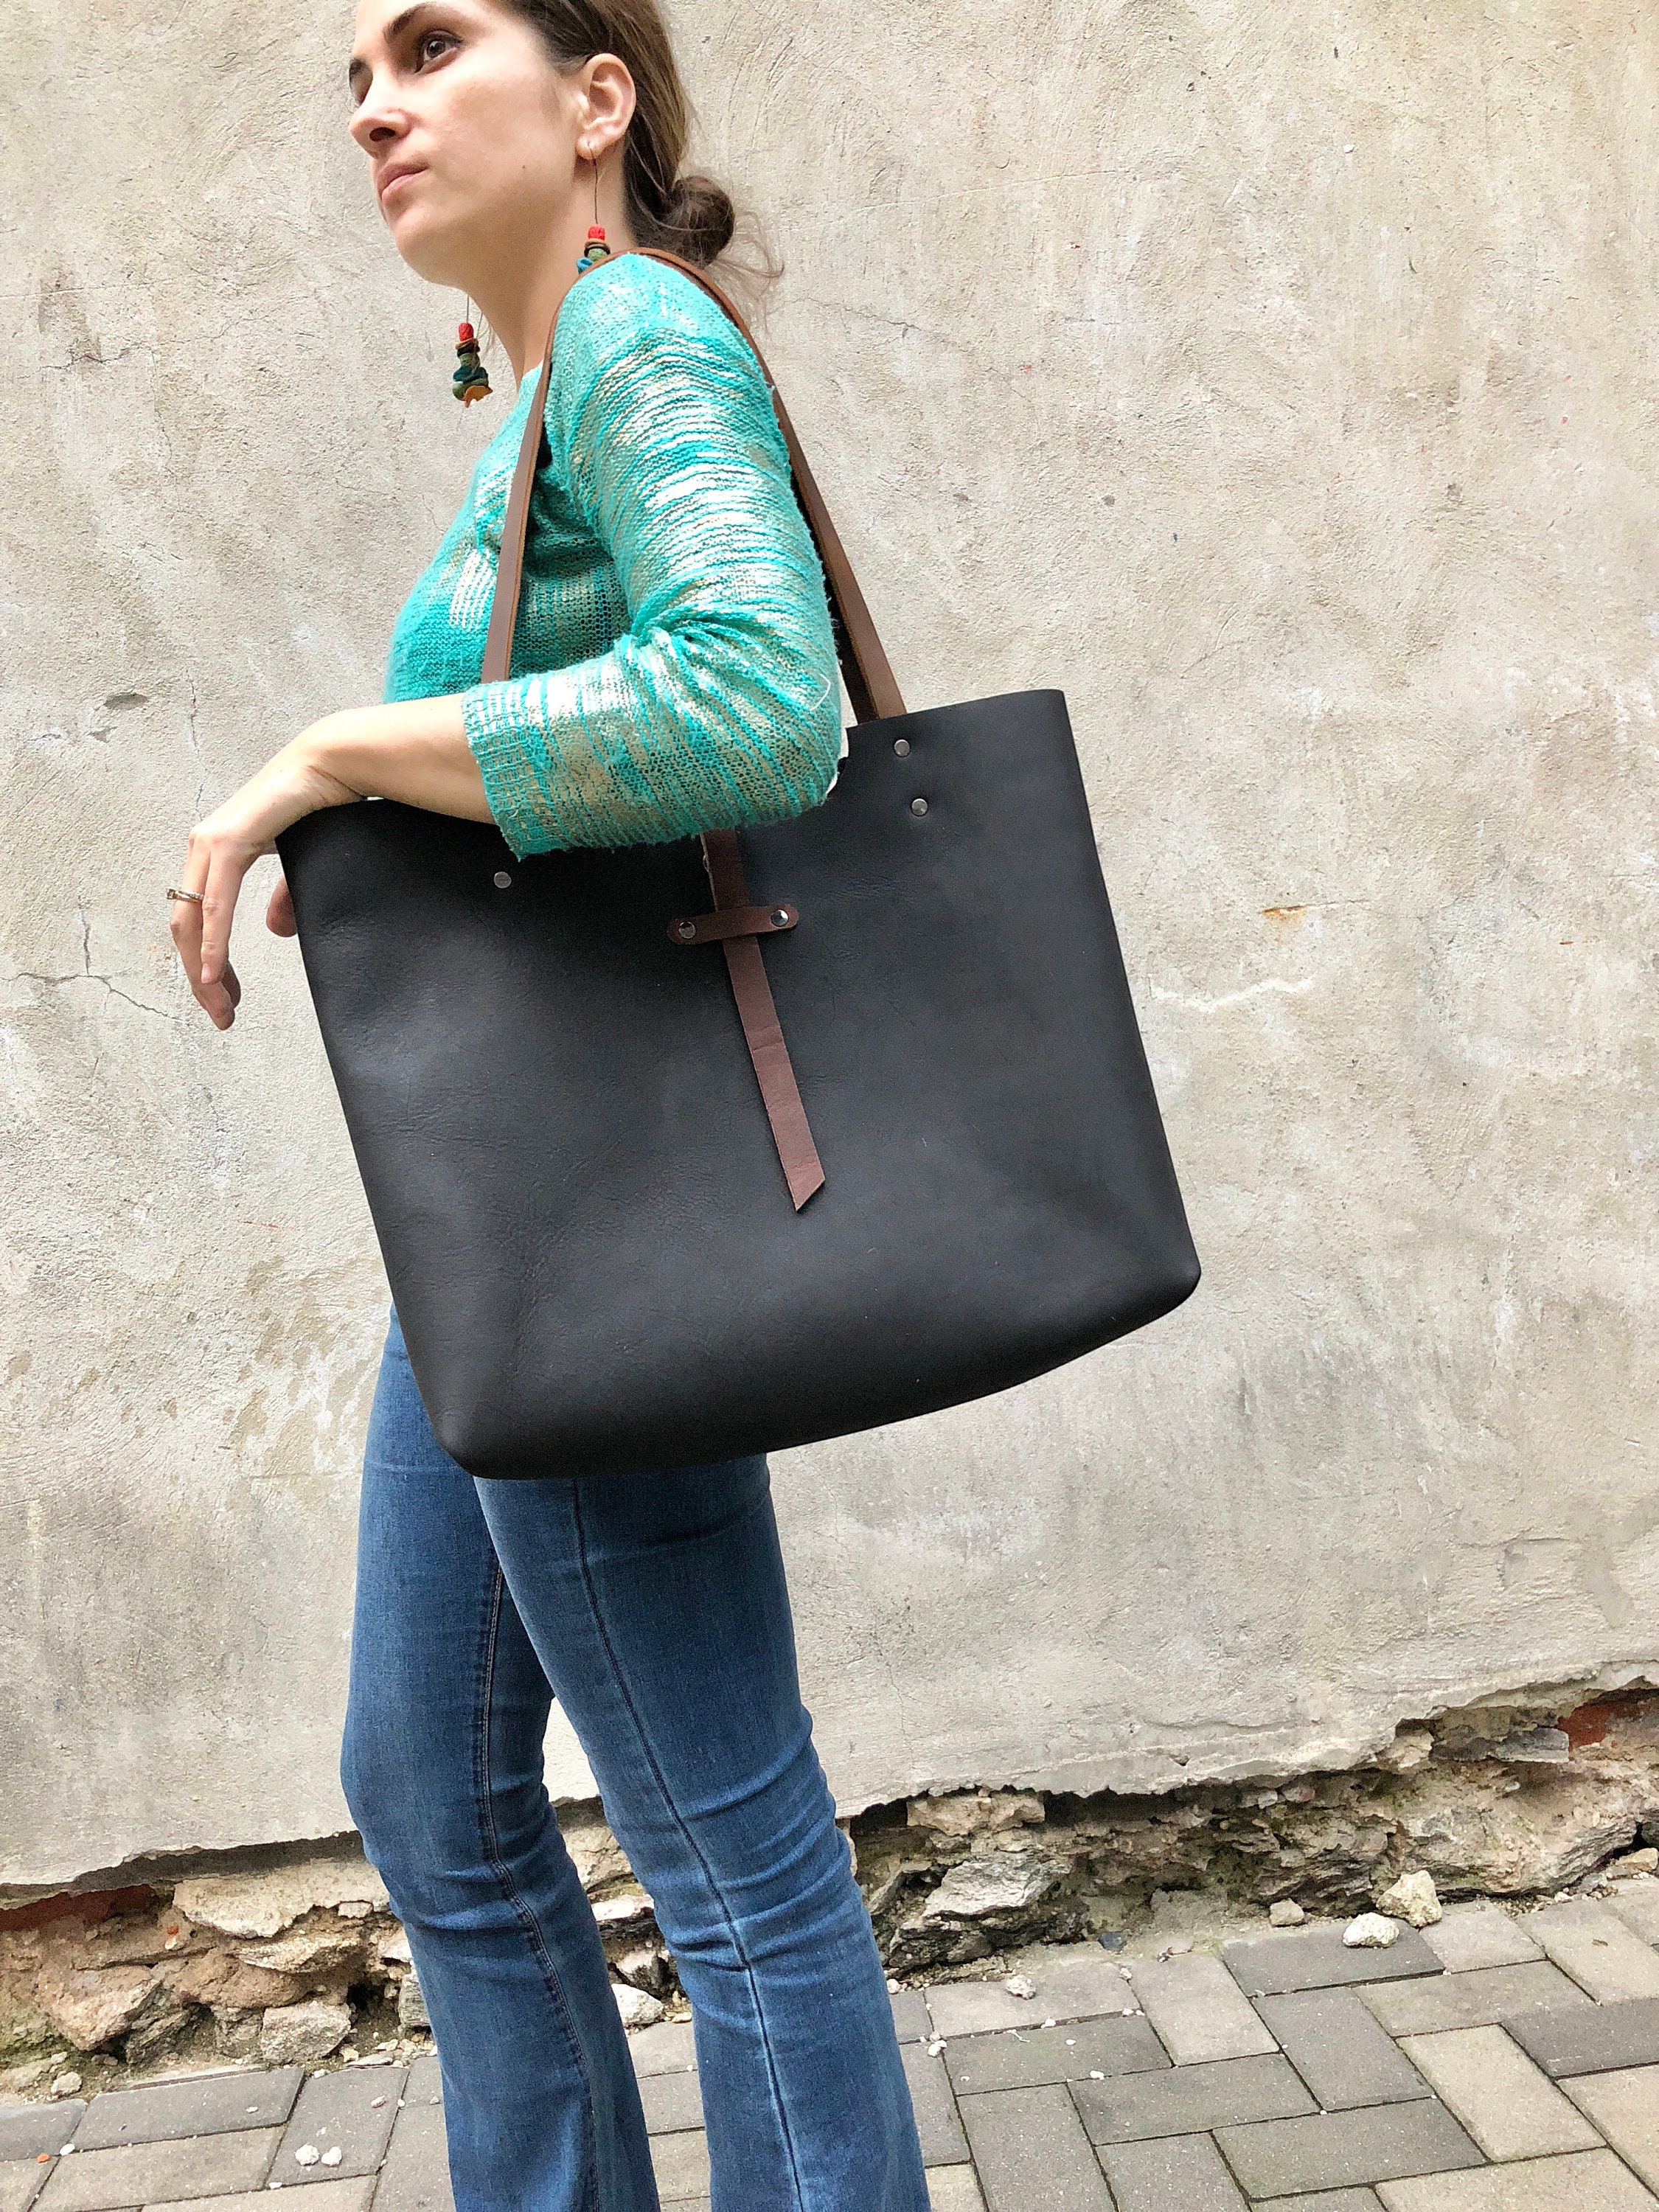 Large black leather tote Work and travel leather computer | Etsy